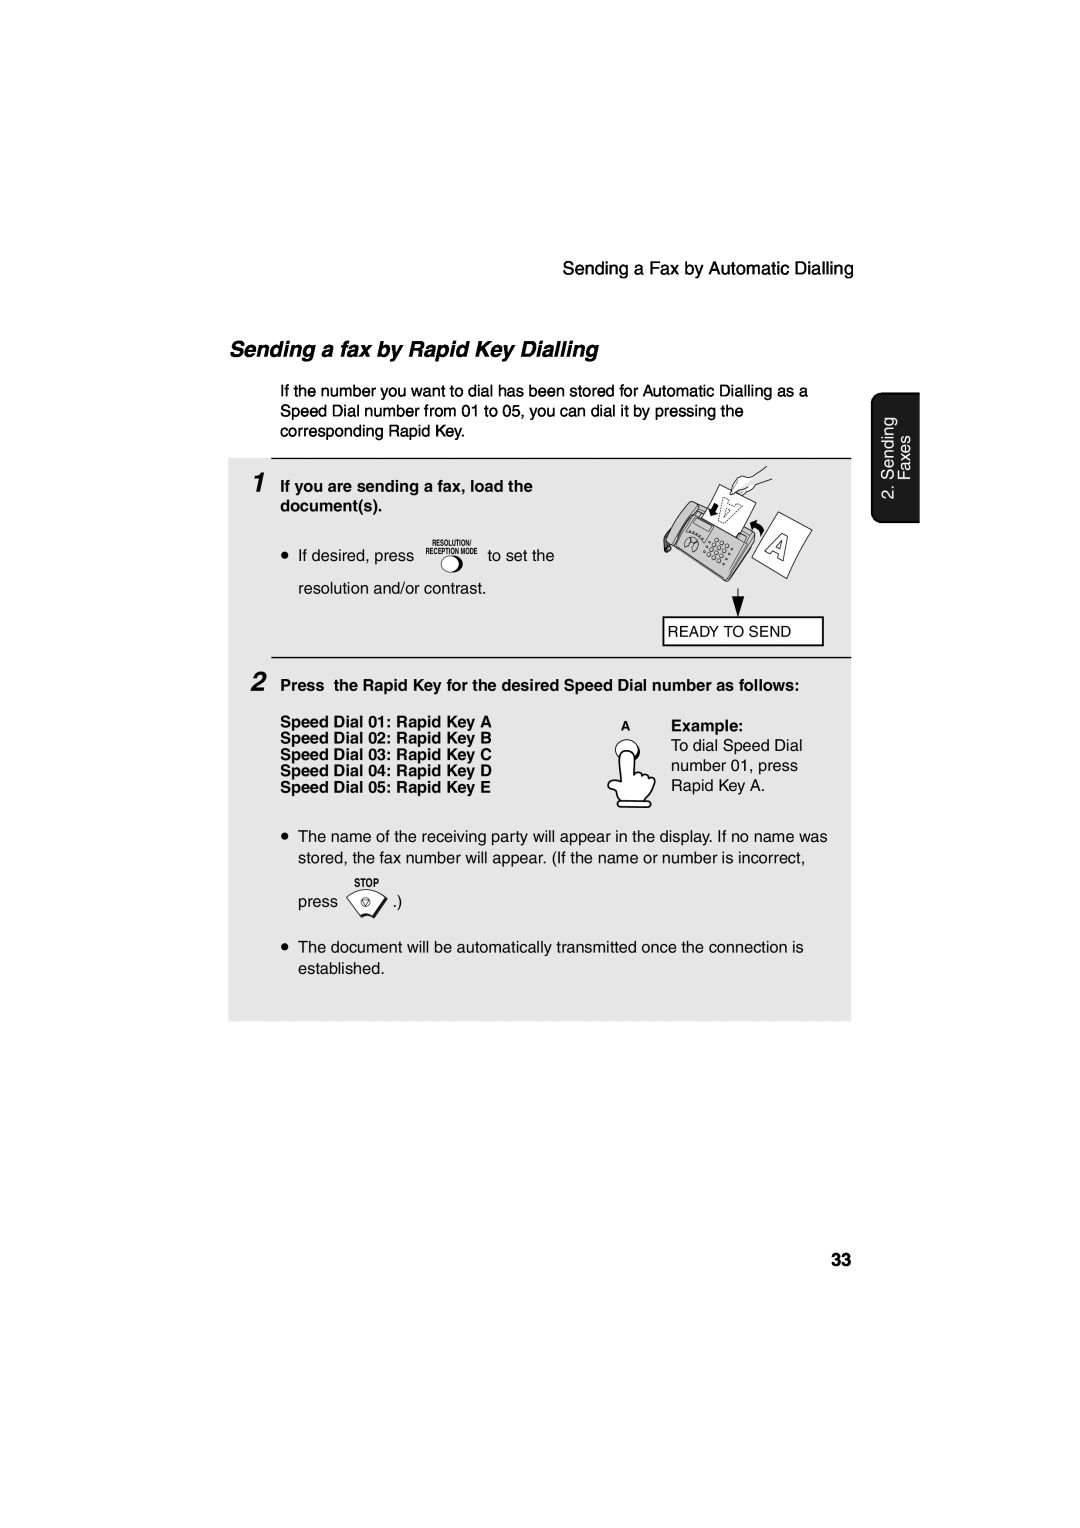 Sharp FO-71 Sending a fax by Rapid Key Dialling, Faxes, If you are sending a fax, load the documents, Example, Rapid Key A 